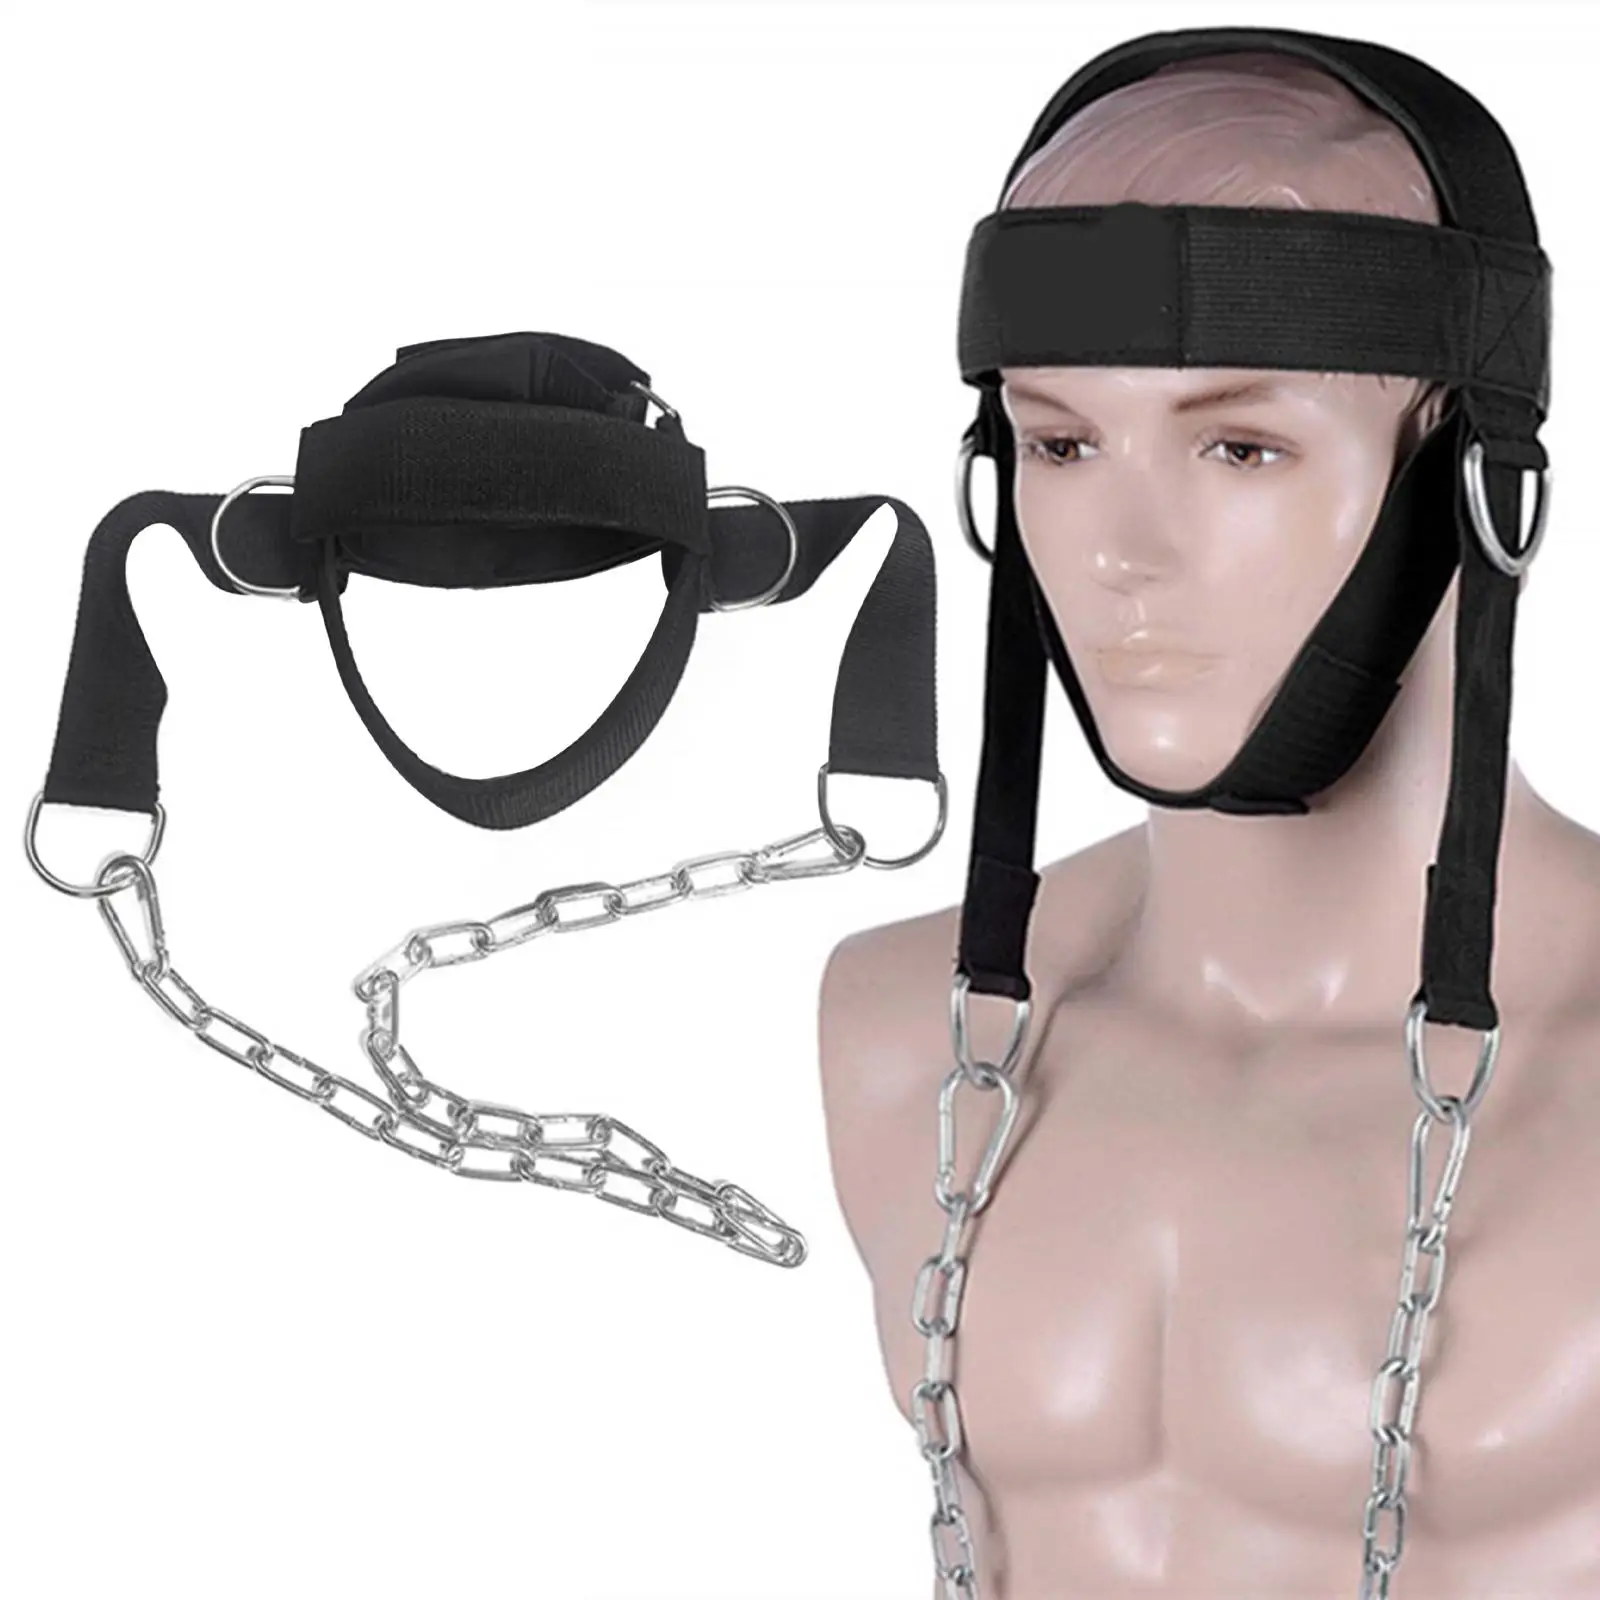 1x Head Neck Harness Adjustable Stronger Oxford Cloth Durable Strengh Exercise